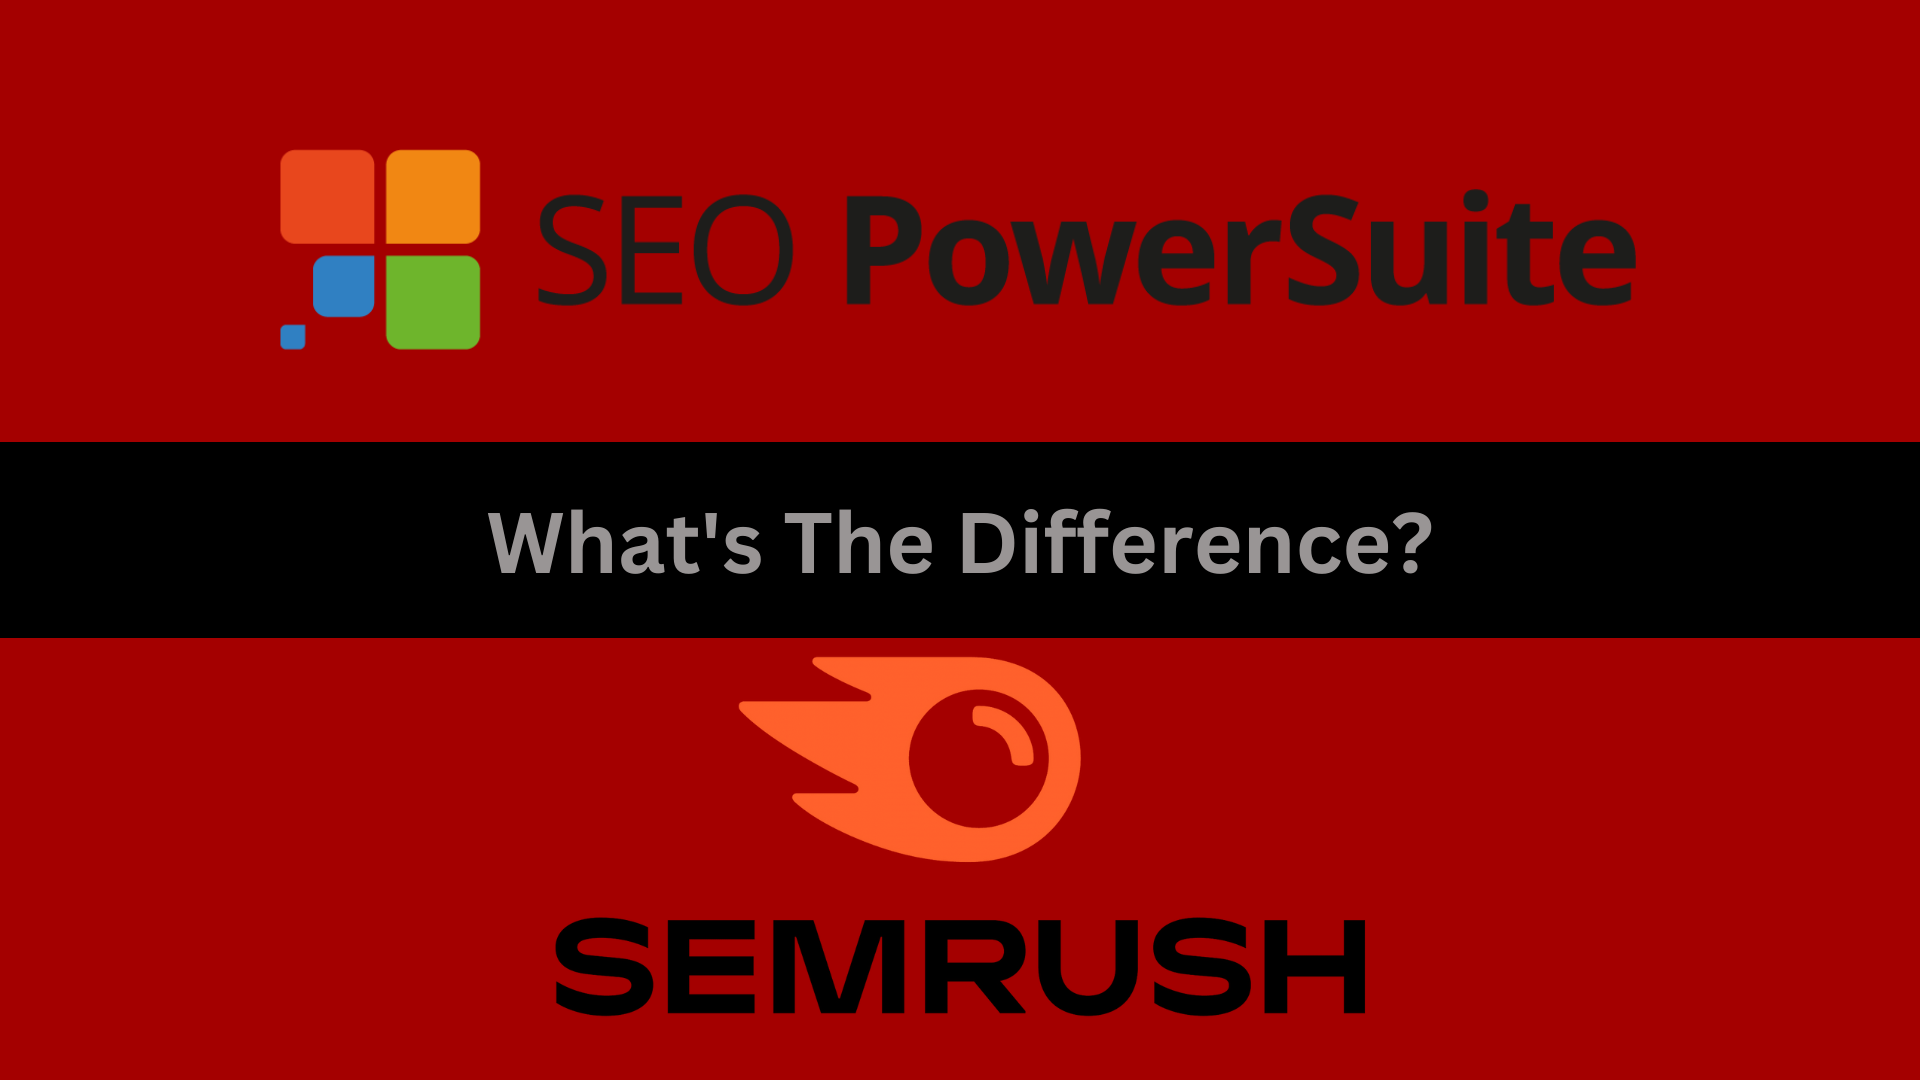 SEO PowerSuite Vs Semrush: Which is the Ultimate SEO Tool for Your Business?